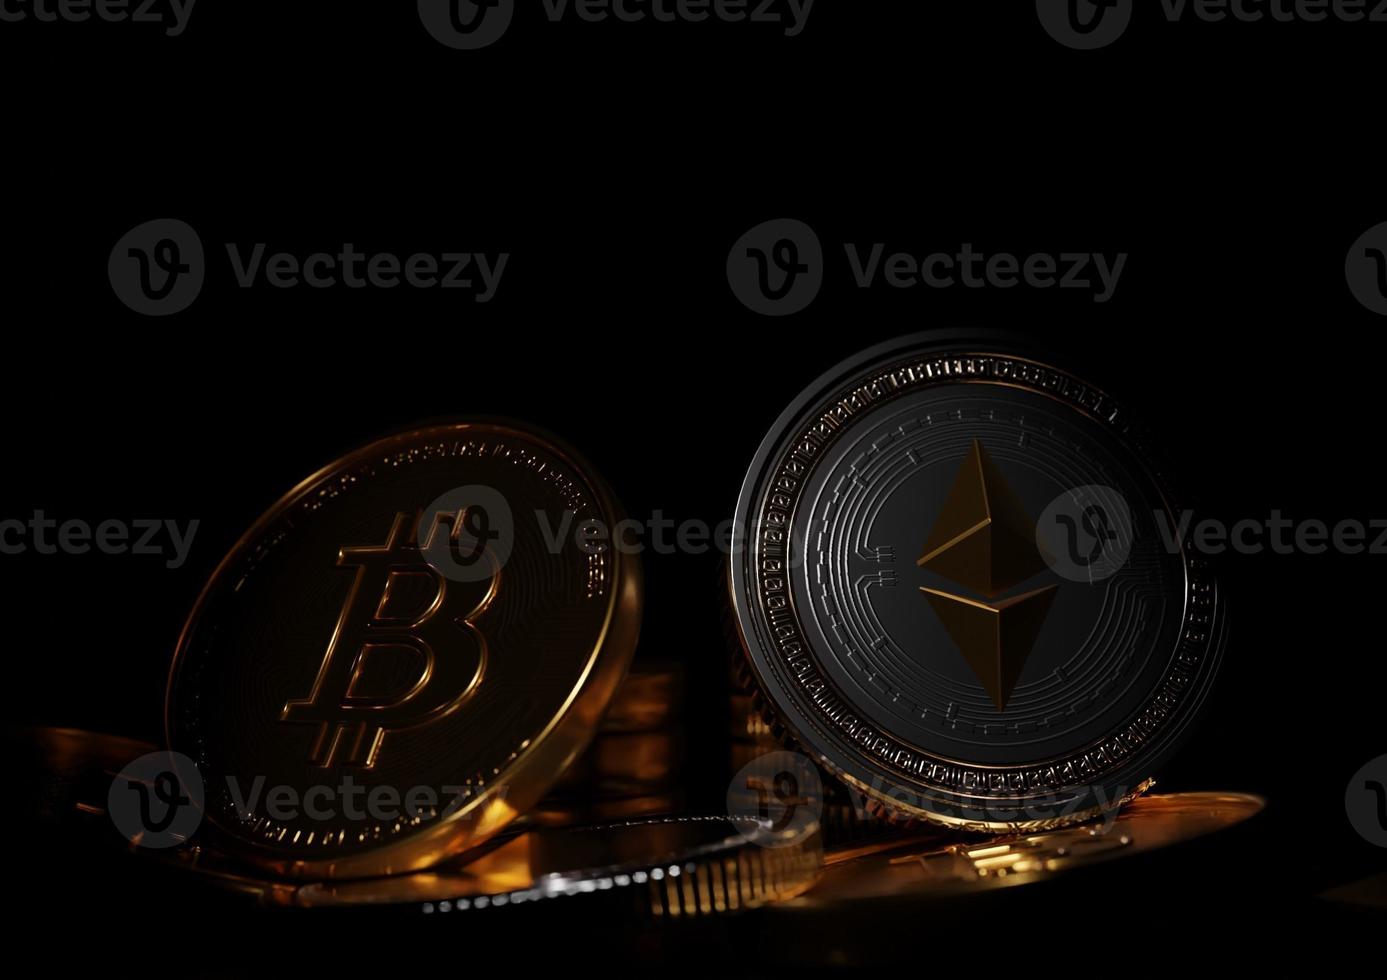 bitcoin and ethereum on black background, 3d bitcoin coins photo